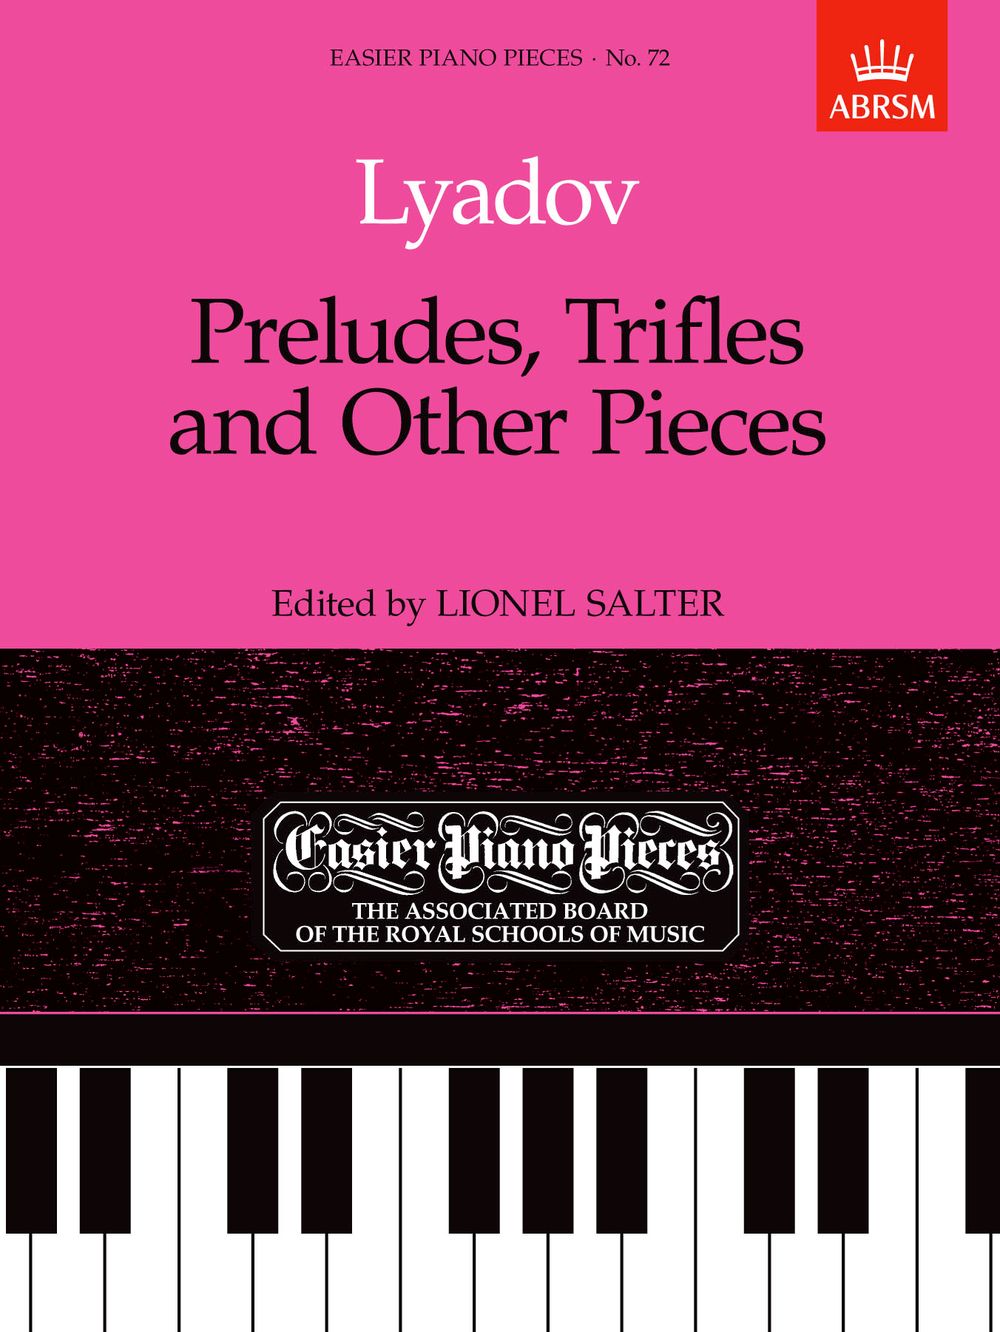 Anatoly Lyadov: Preludes  Trifles and Other Pieces: Piano: Instrumental Album